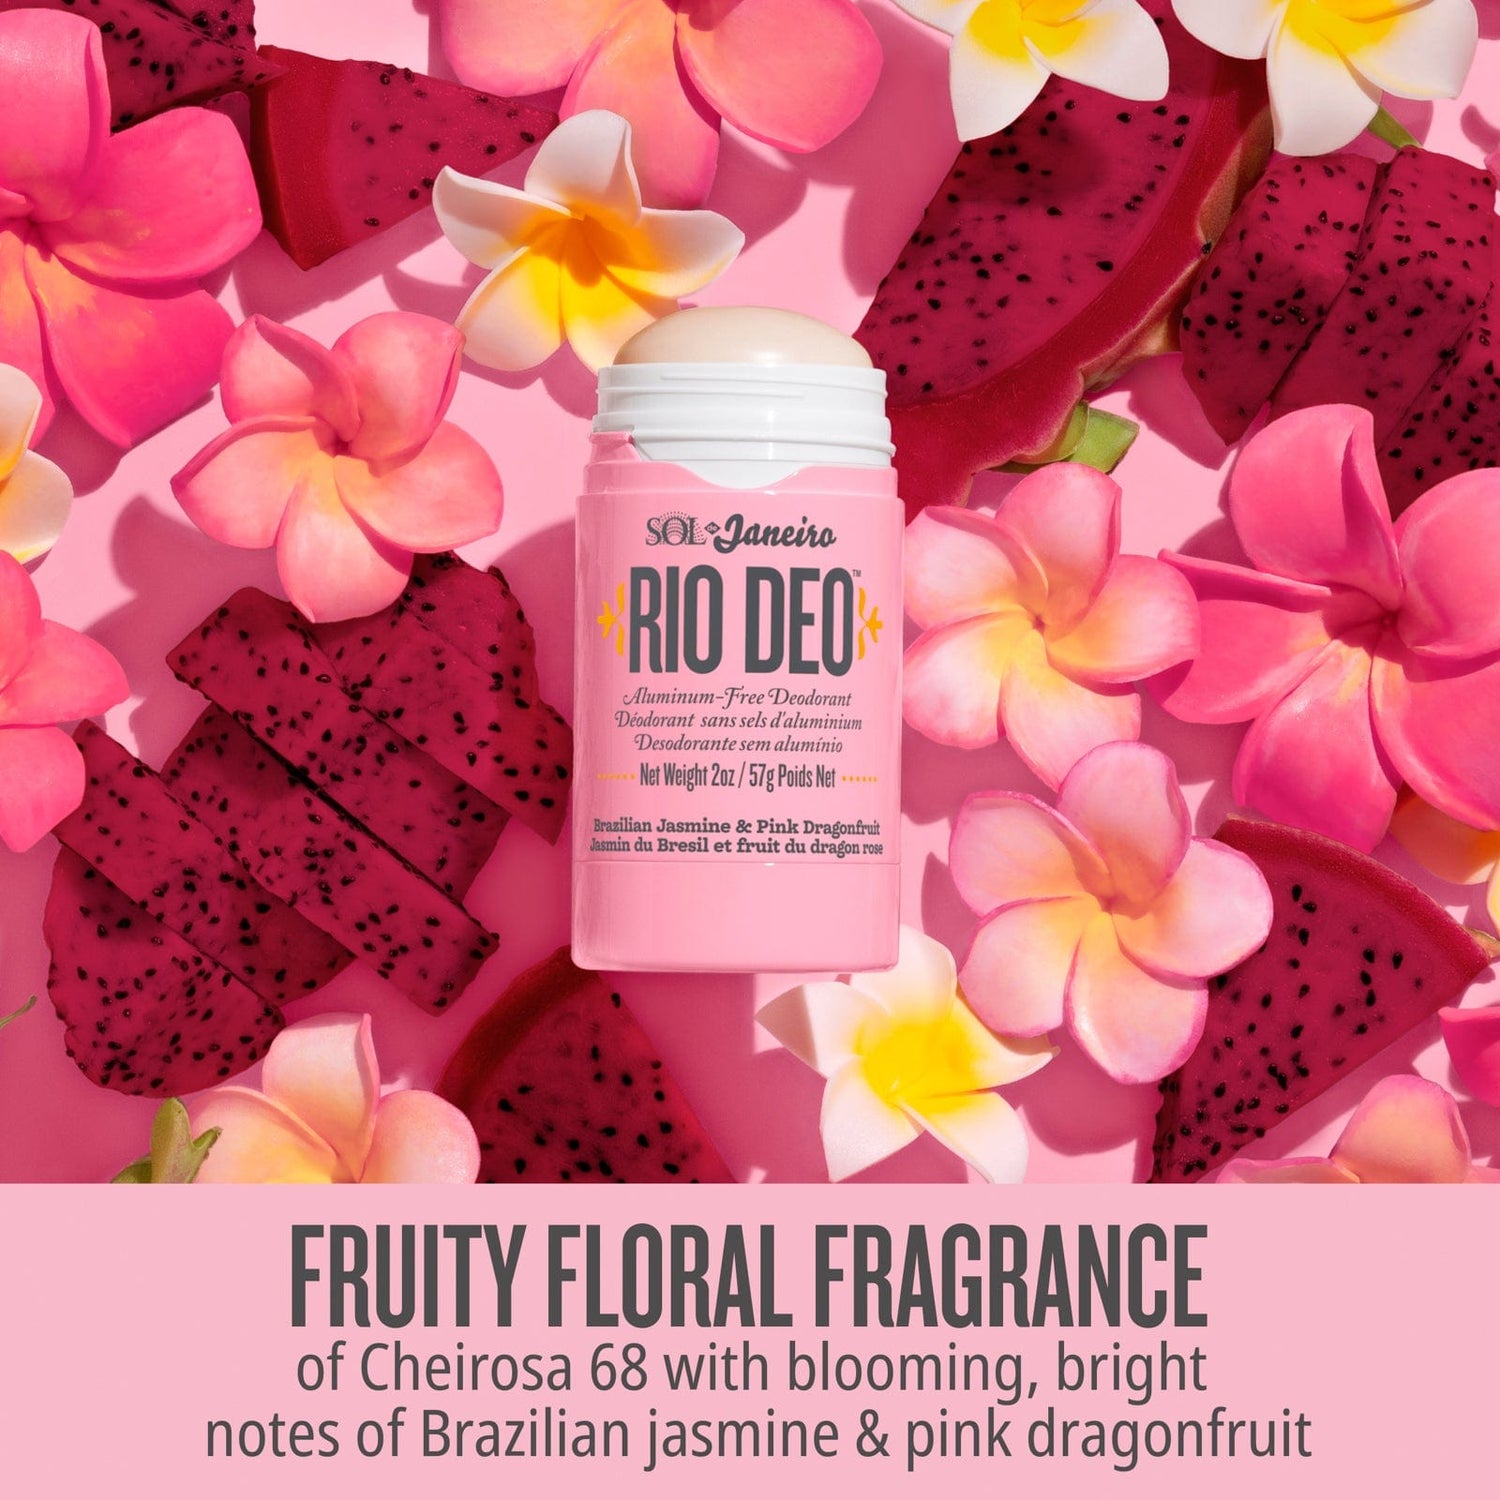 fruity floral fragrance of cheirosa 68 with blooming, bright notes of brazilian jasmine and pink dragonfruit